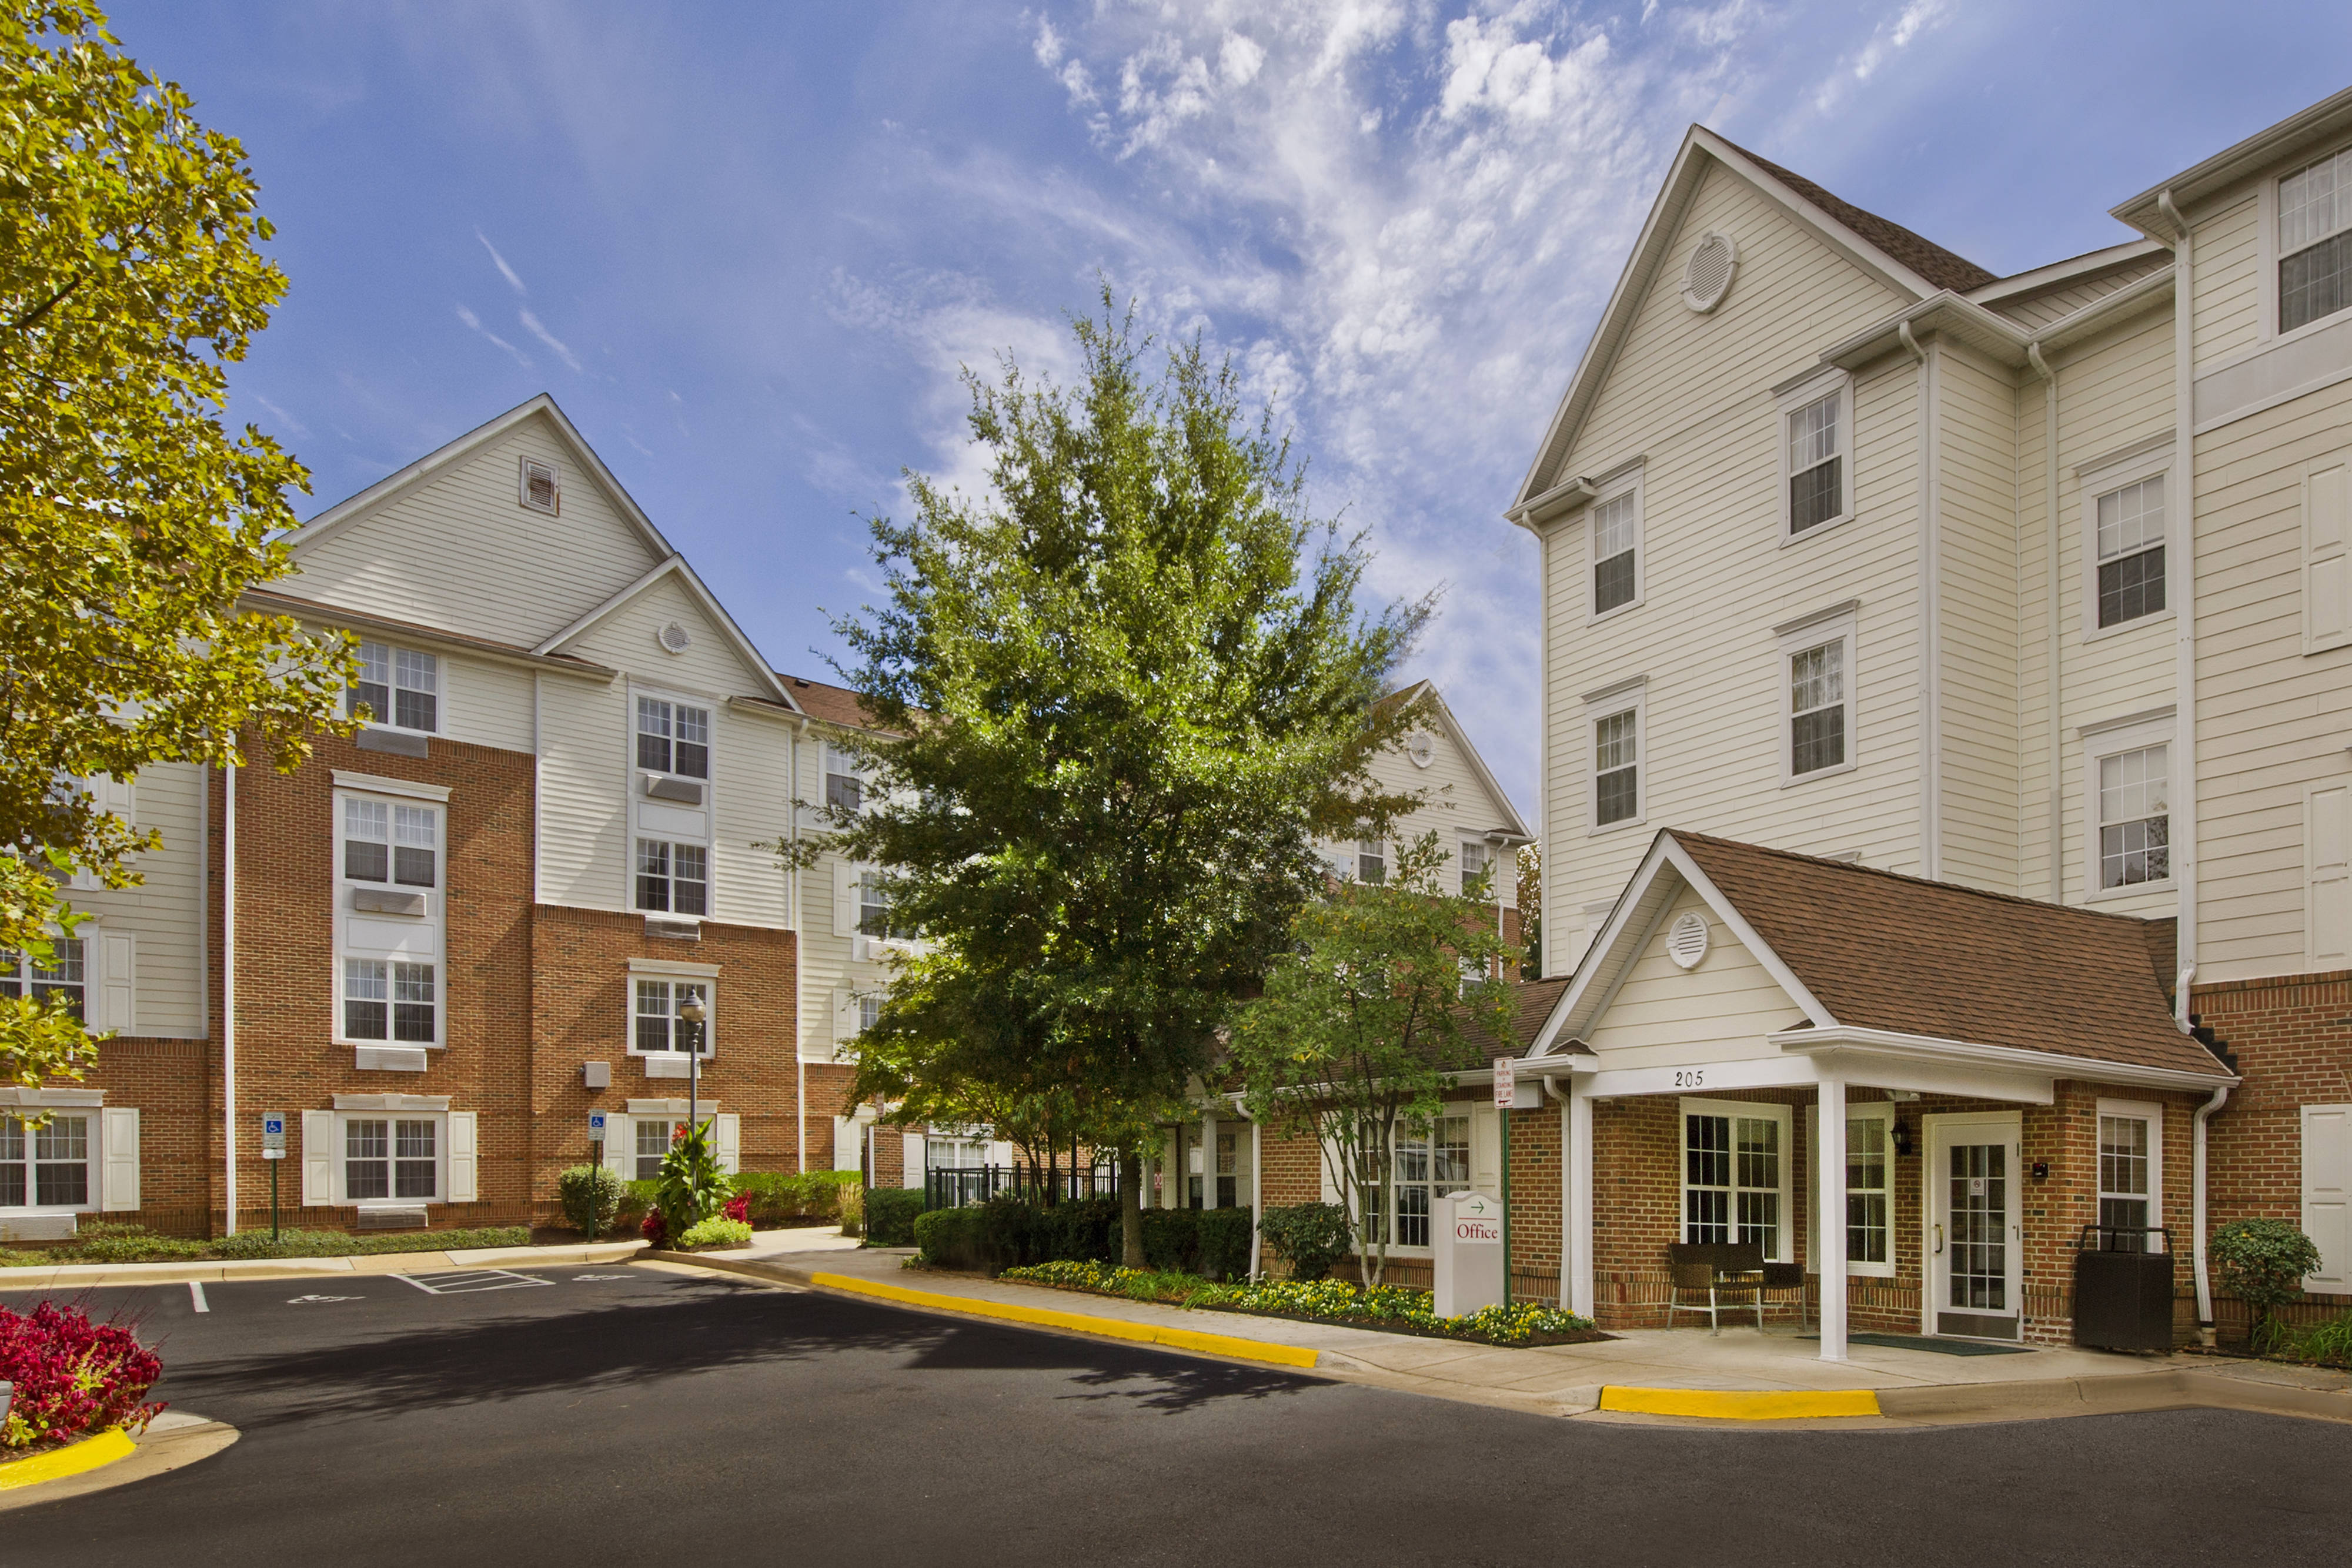 Photo of TownePlace Suites by Marriott Falls Church, Falls Church, VA